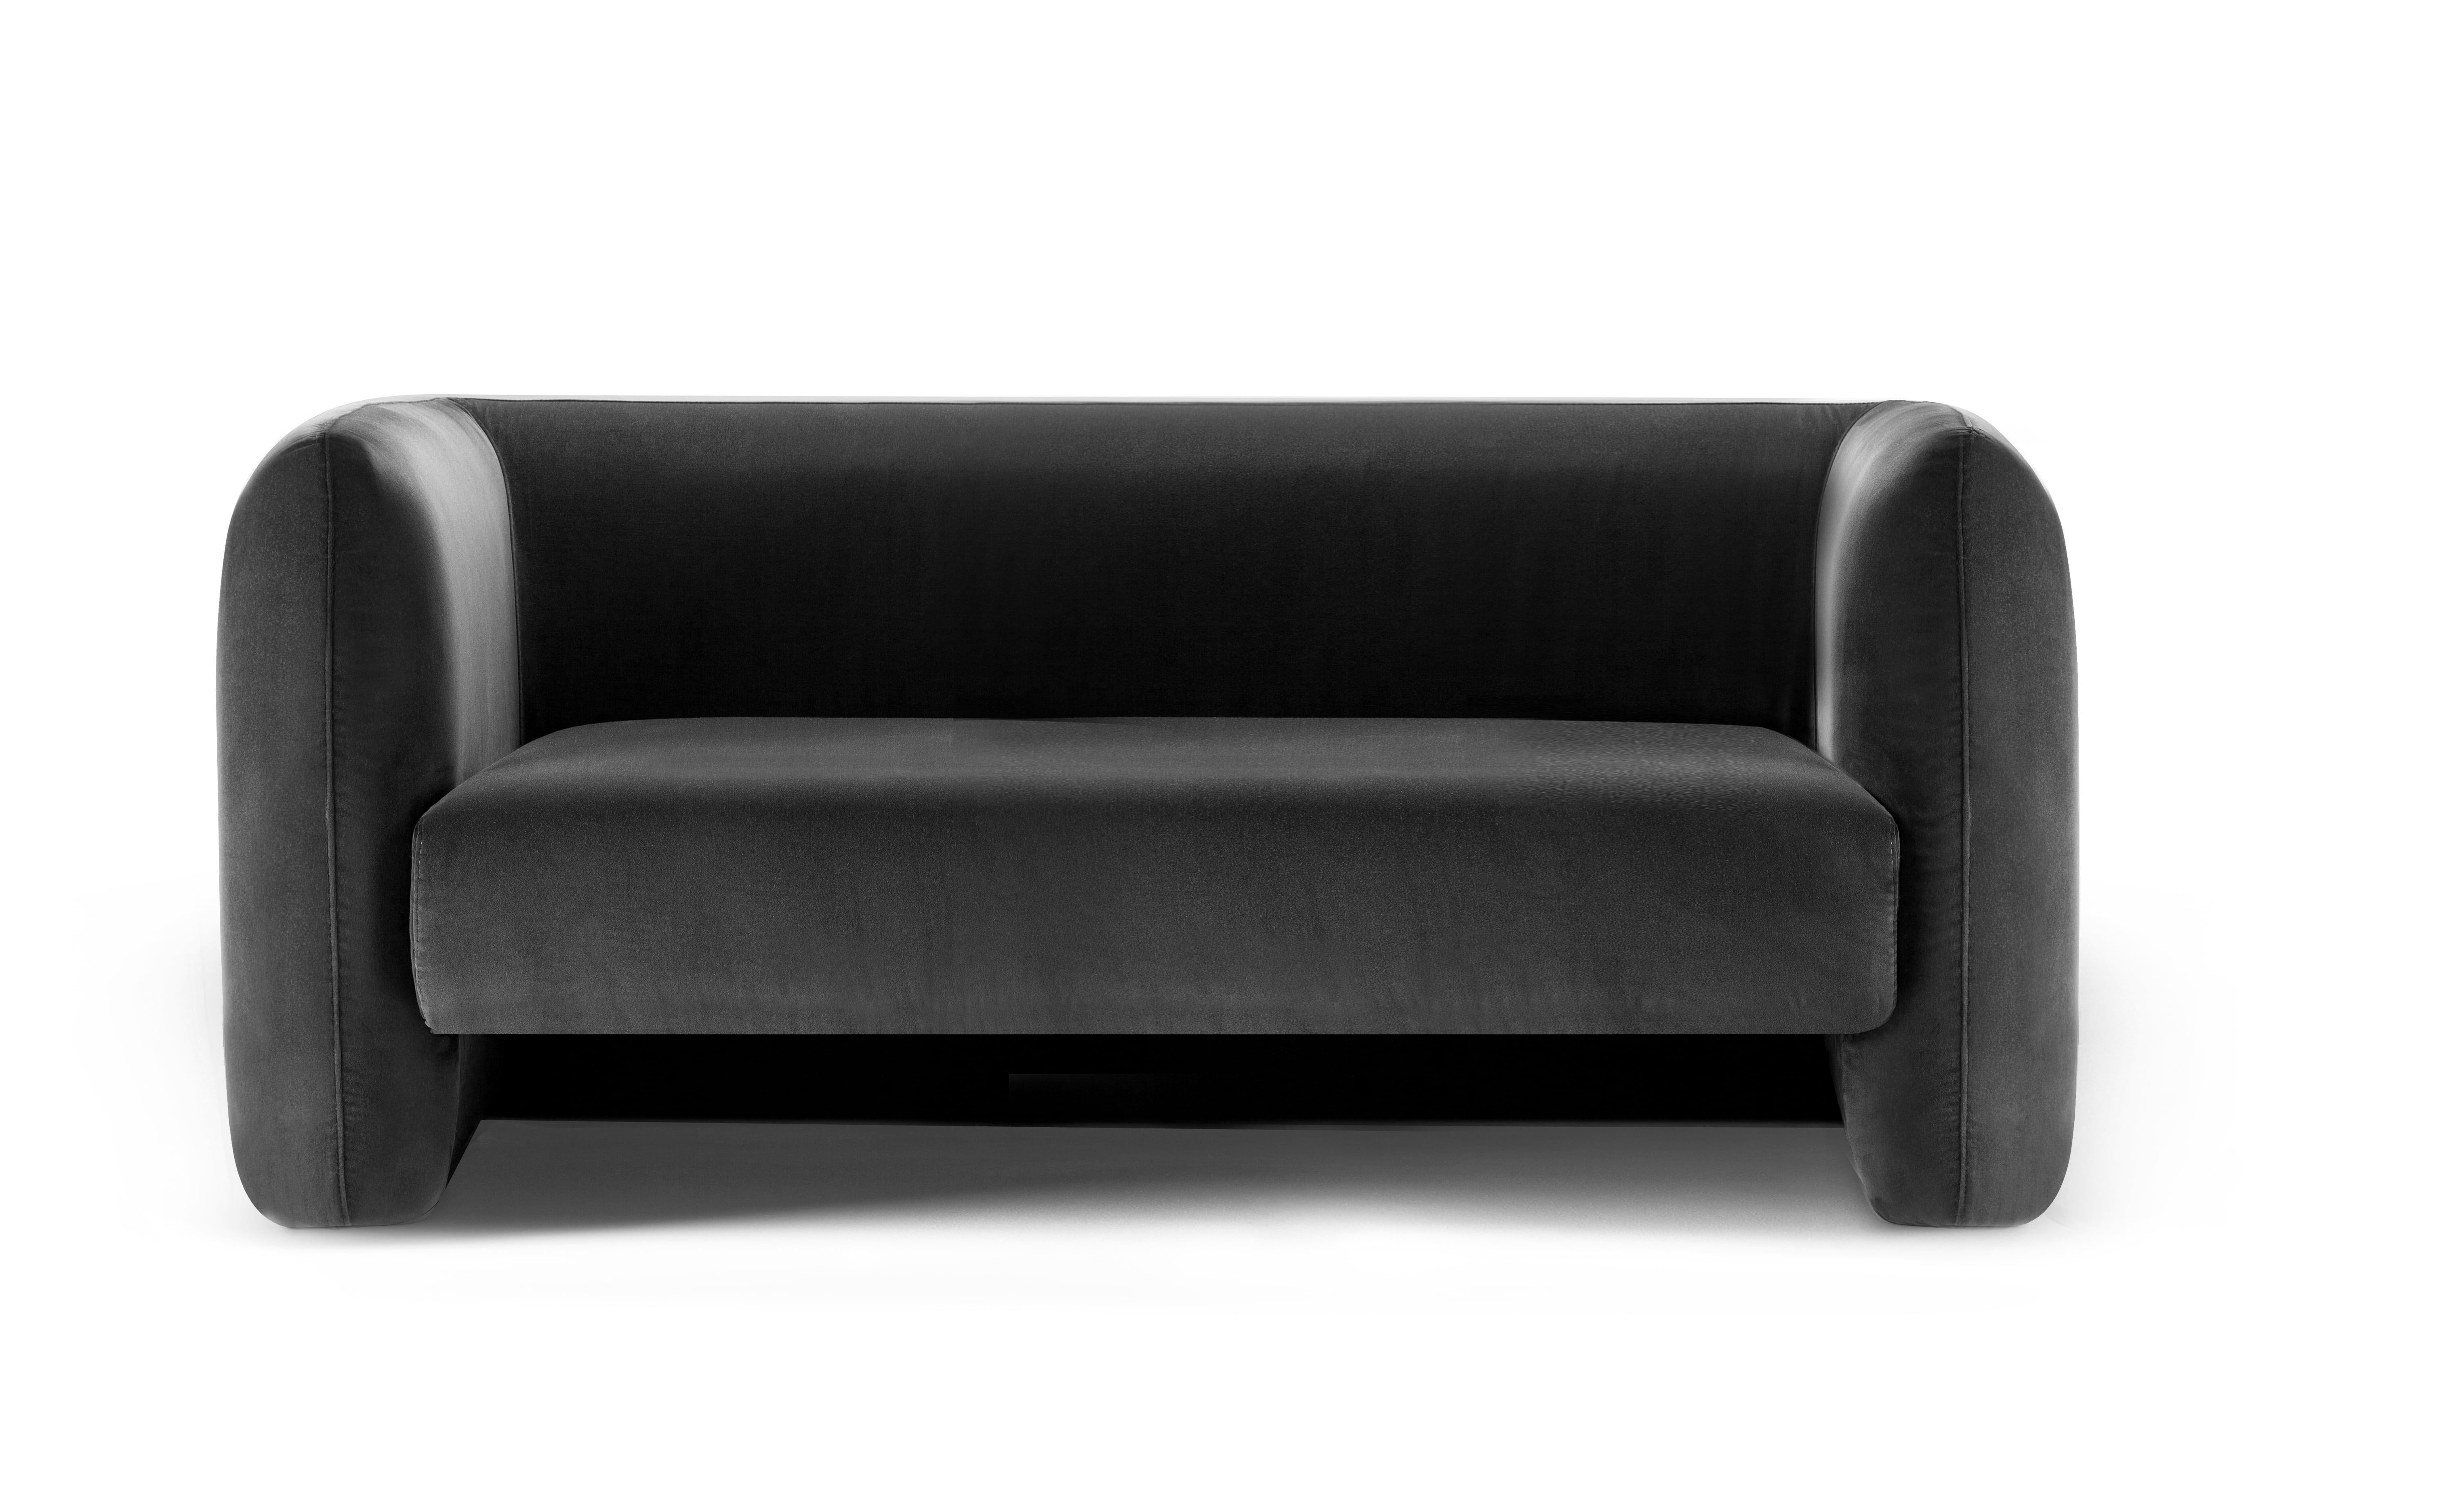 Contemporary Modern Collector Studio Jacob Sofa in Black Velvet by Collector

This fun and sophisticated 21st century sofa designed by Collector Studio, it’s simple shape and attractive color game along with other possible combinations of materials